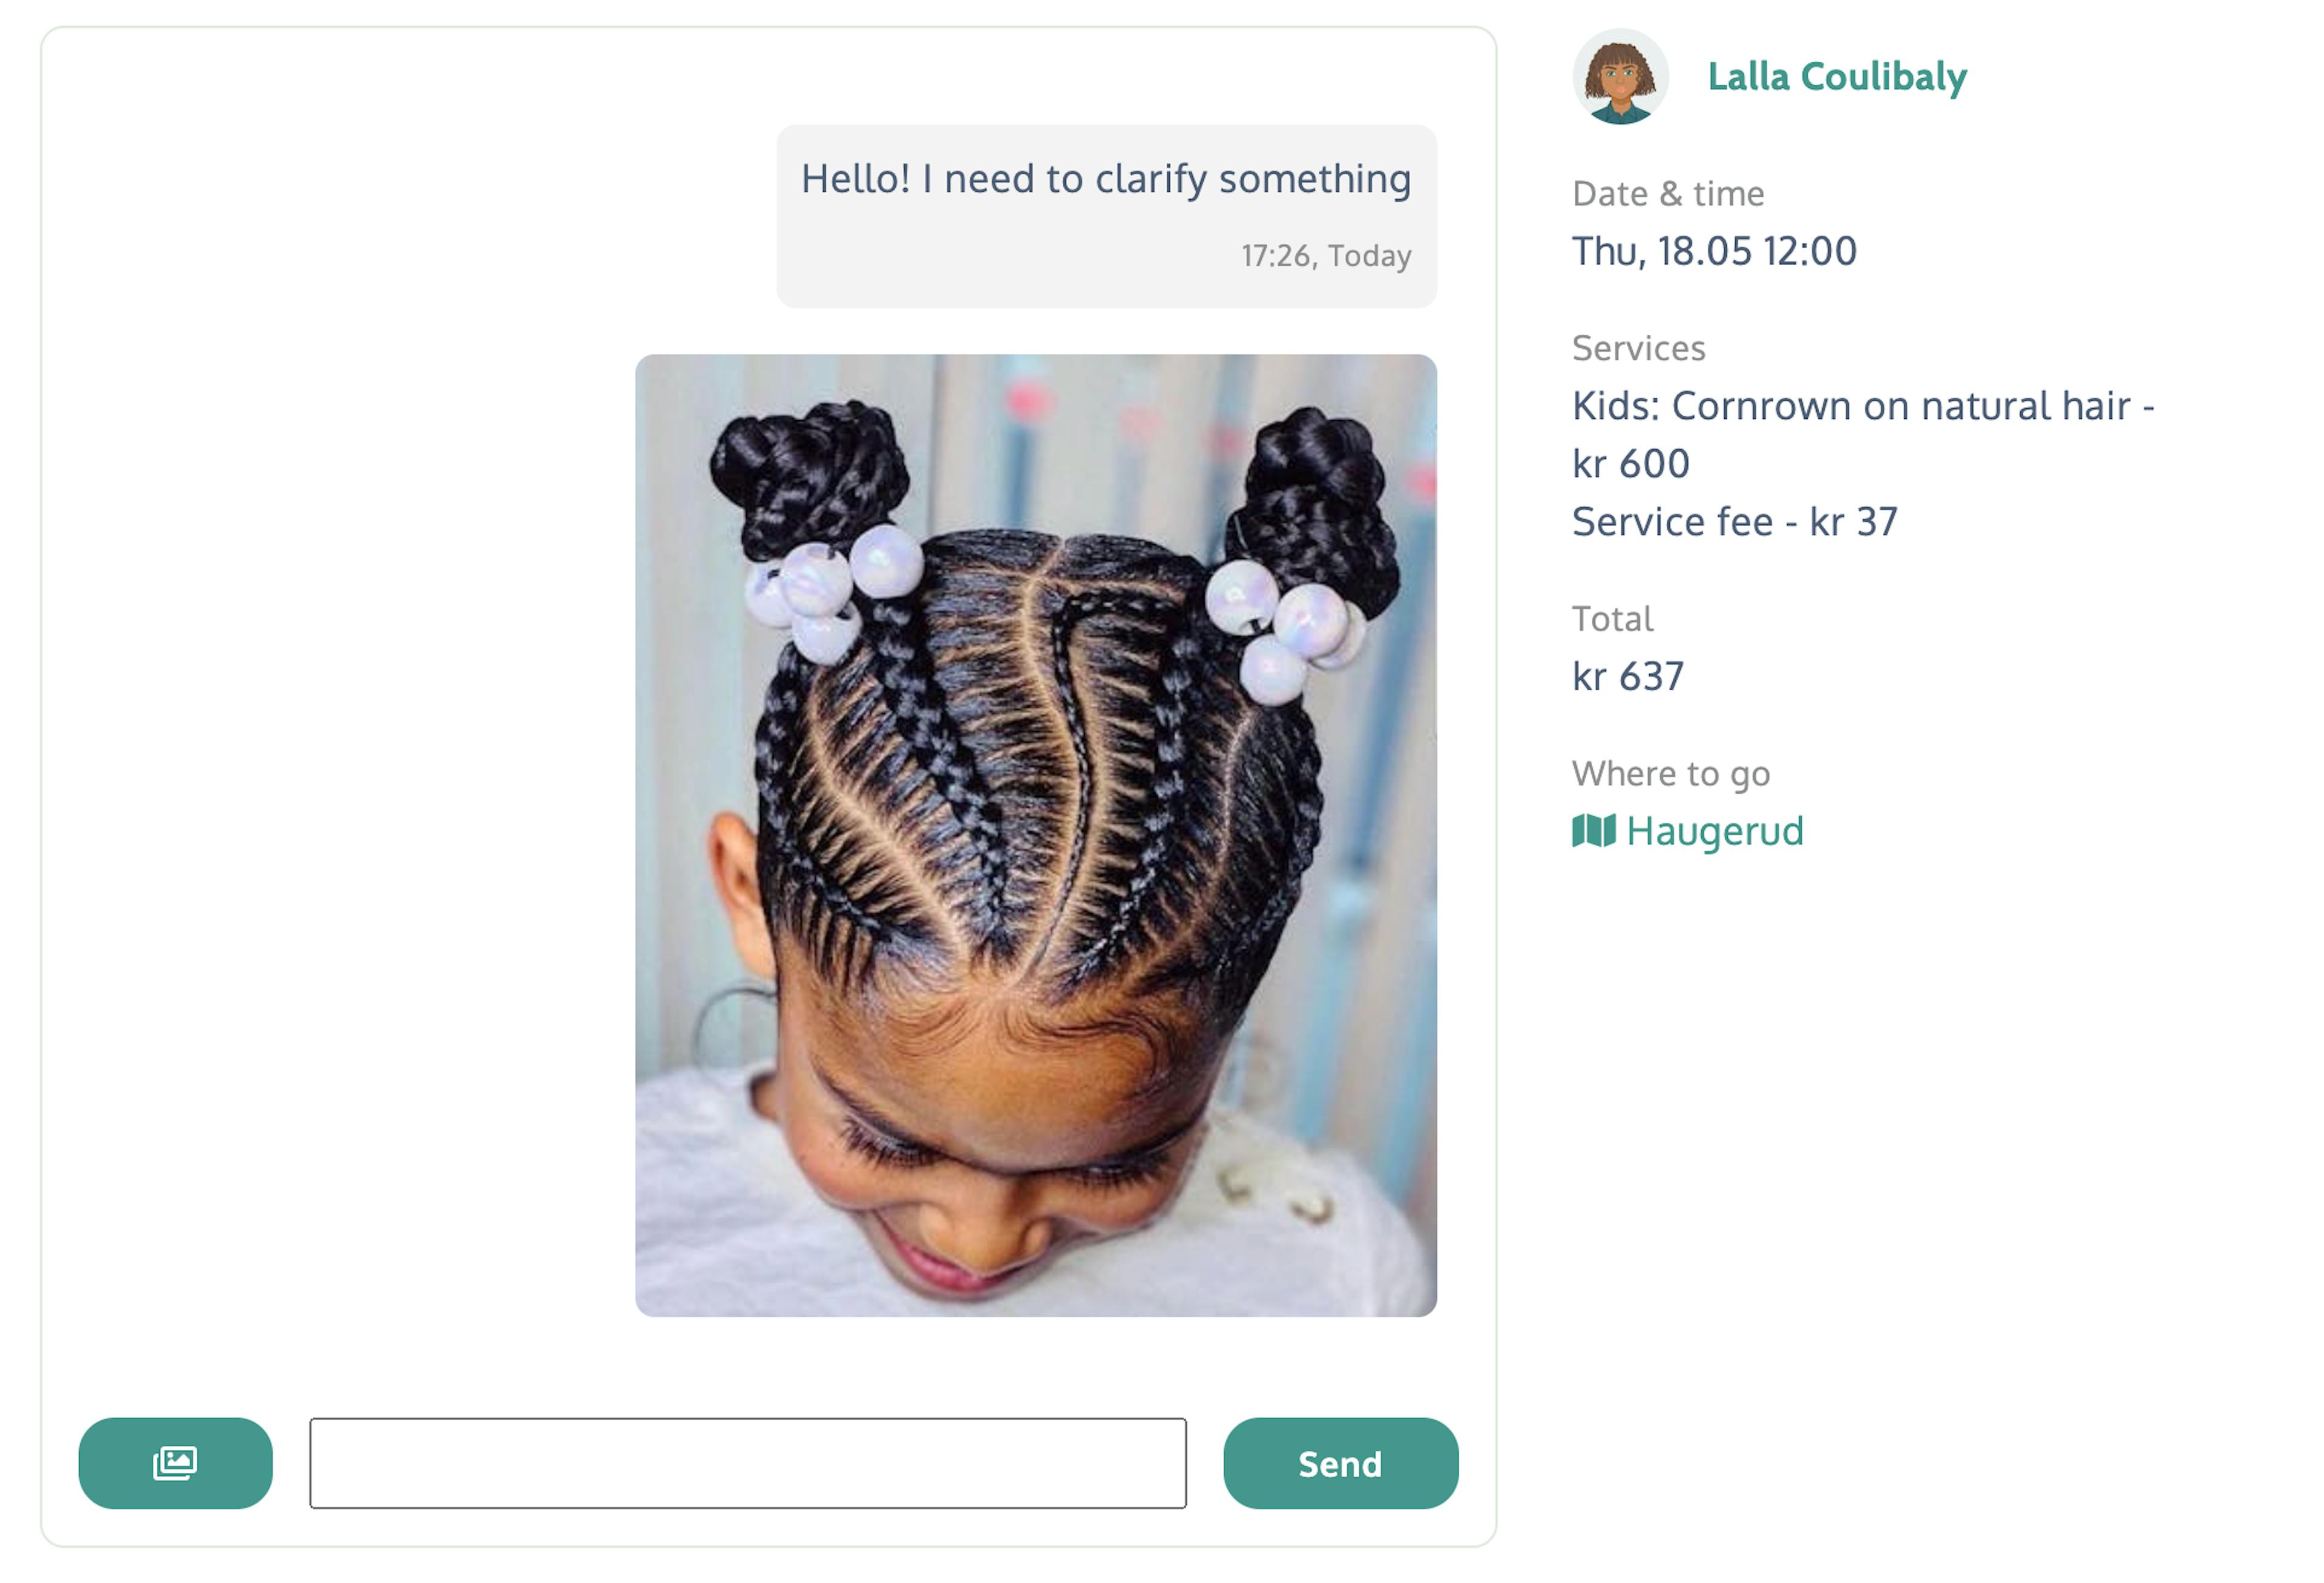 Chat example in Norwegian hairdresser marketplace https://www.thedaba.com/